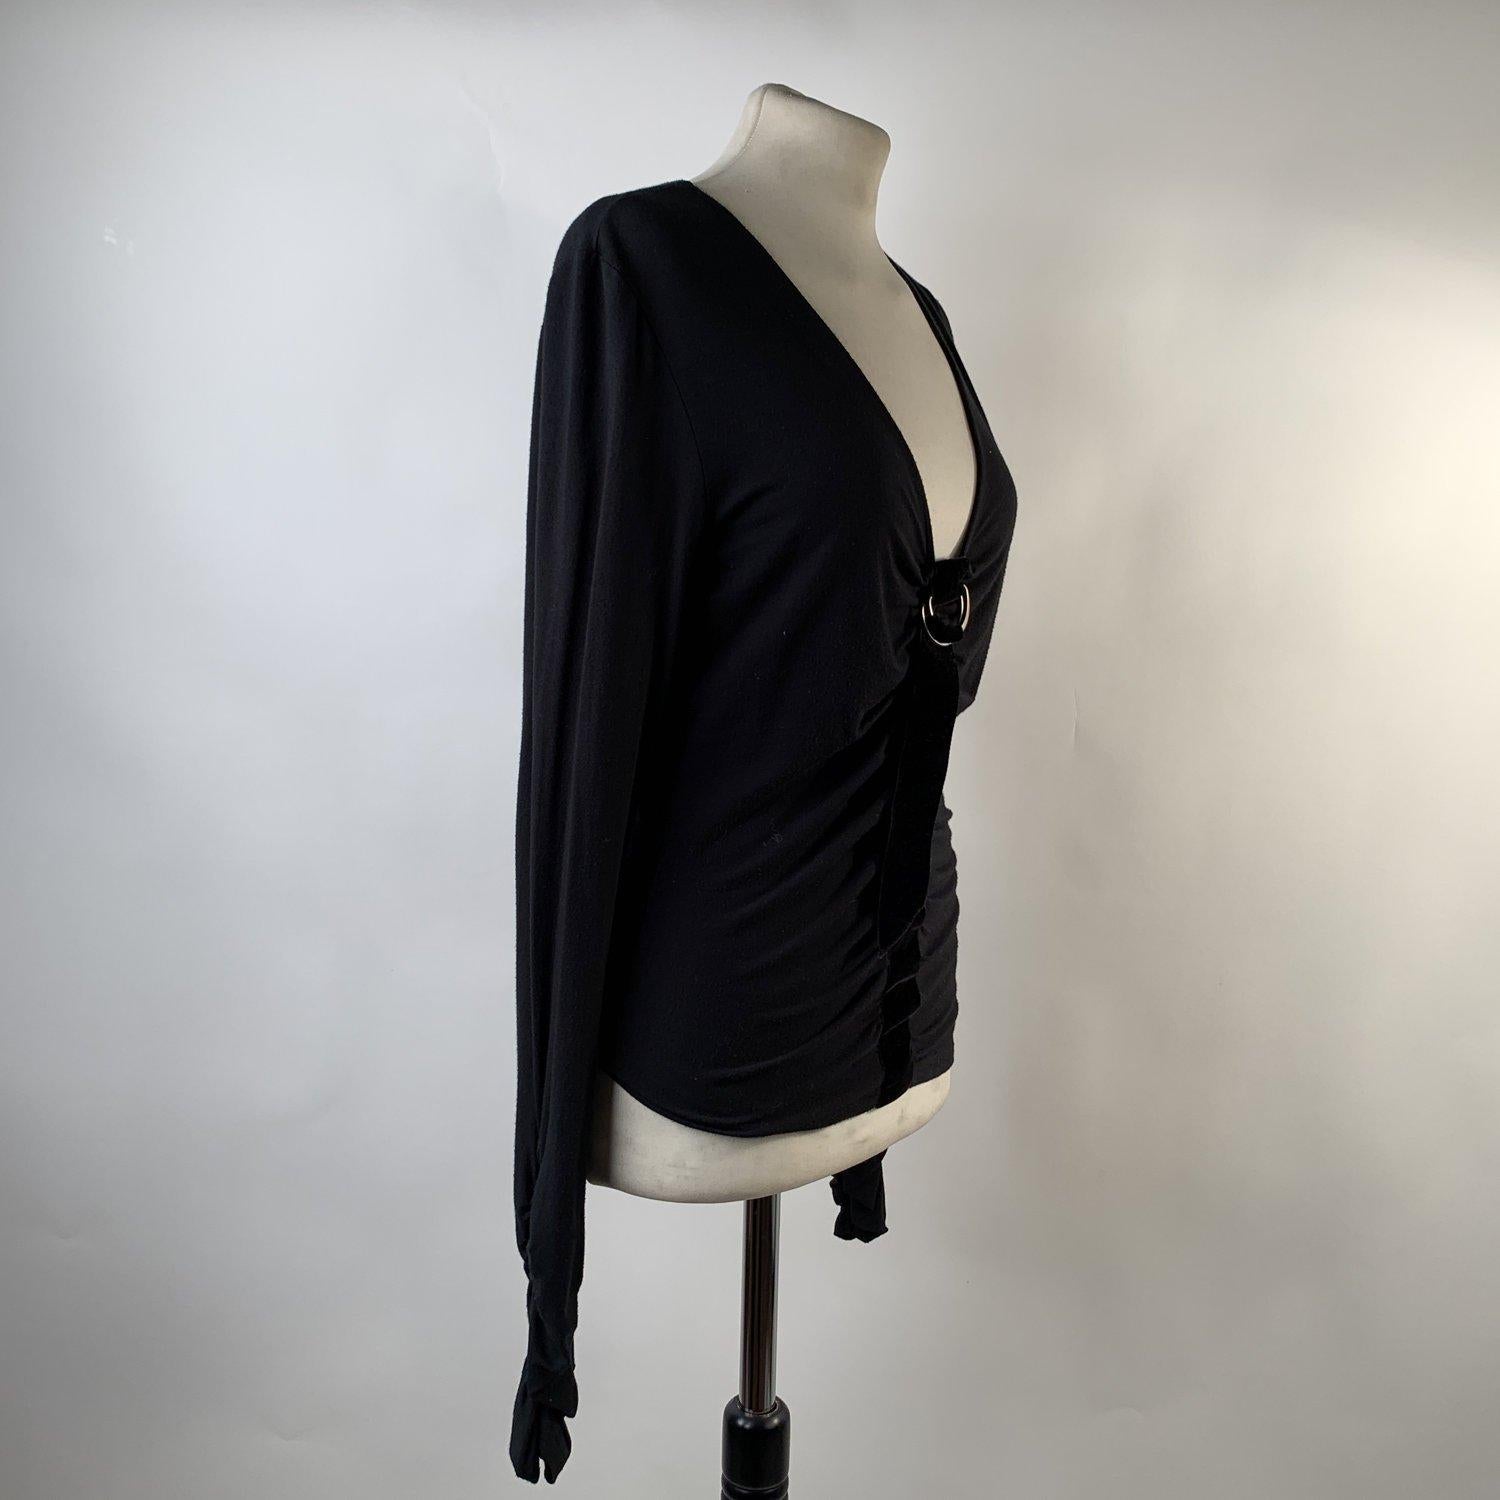 MATERIAL: Viscose COLOR: Black MODEL: Long Sleeve Top GENDER: Women SIZE: Medium COUNTRY OF MANUFACTURE: Italy Condition CONDITION DETAILS: B :GOOD CONDITION - Some light wear of use - gently used- Previously worn with moderate wash wear/fade and or